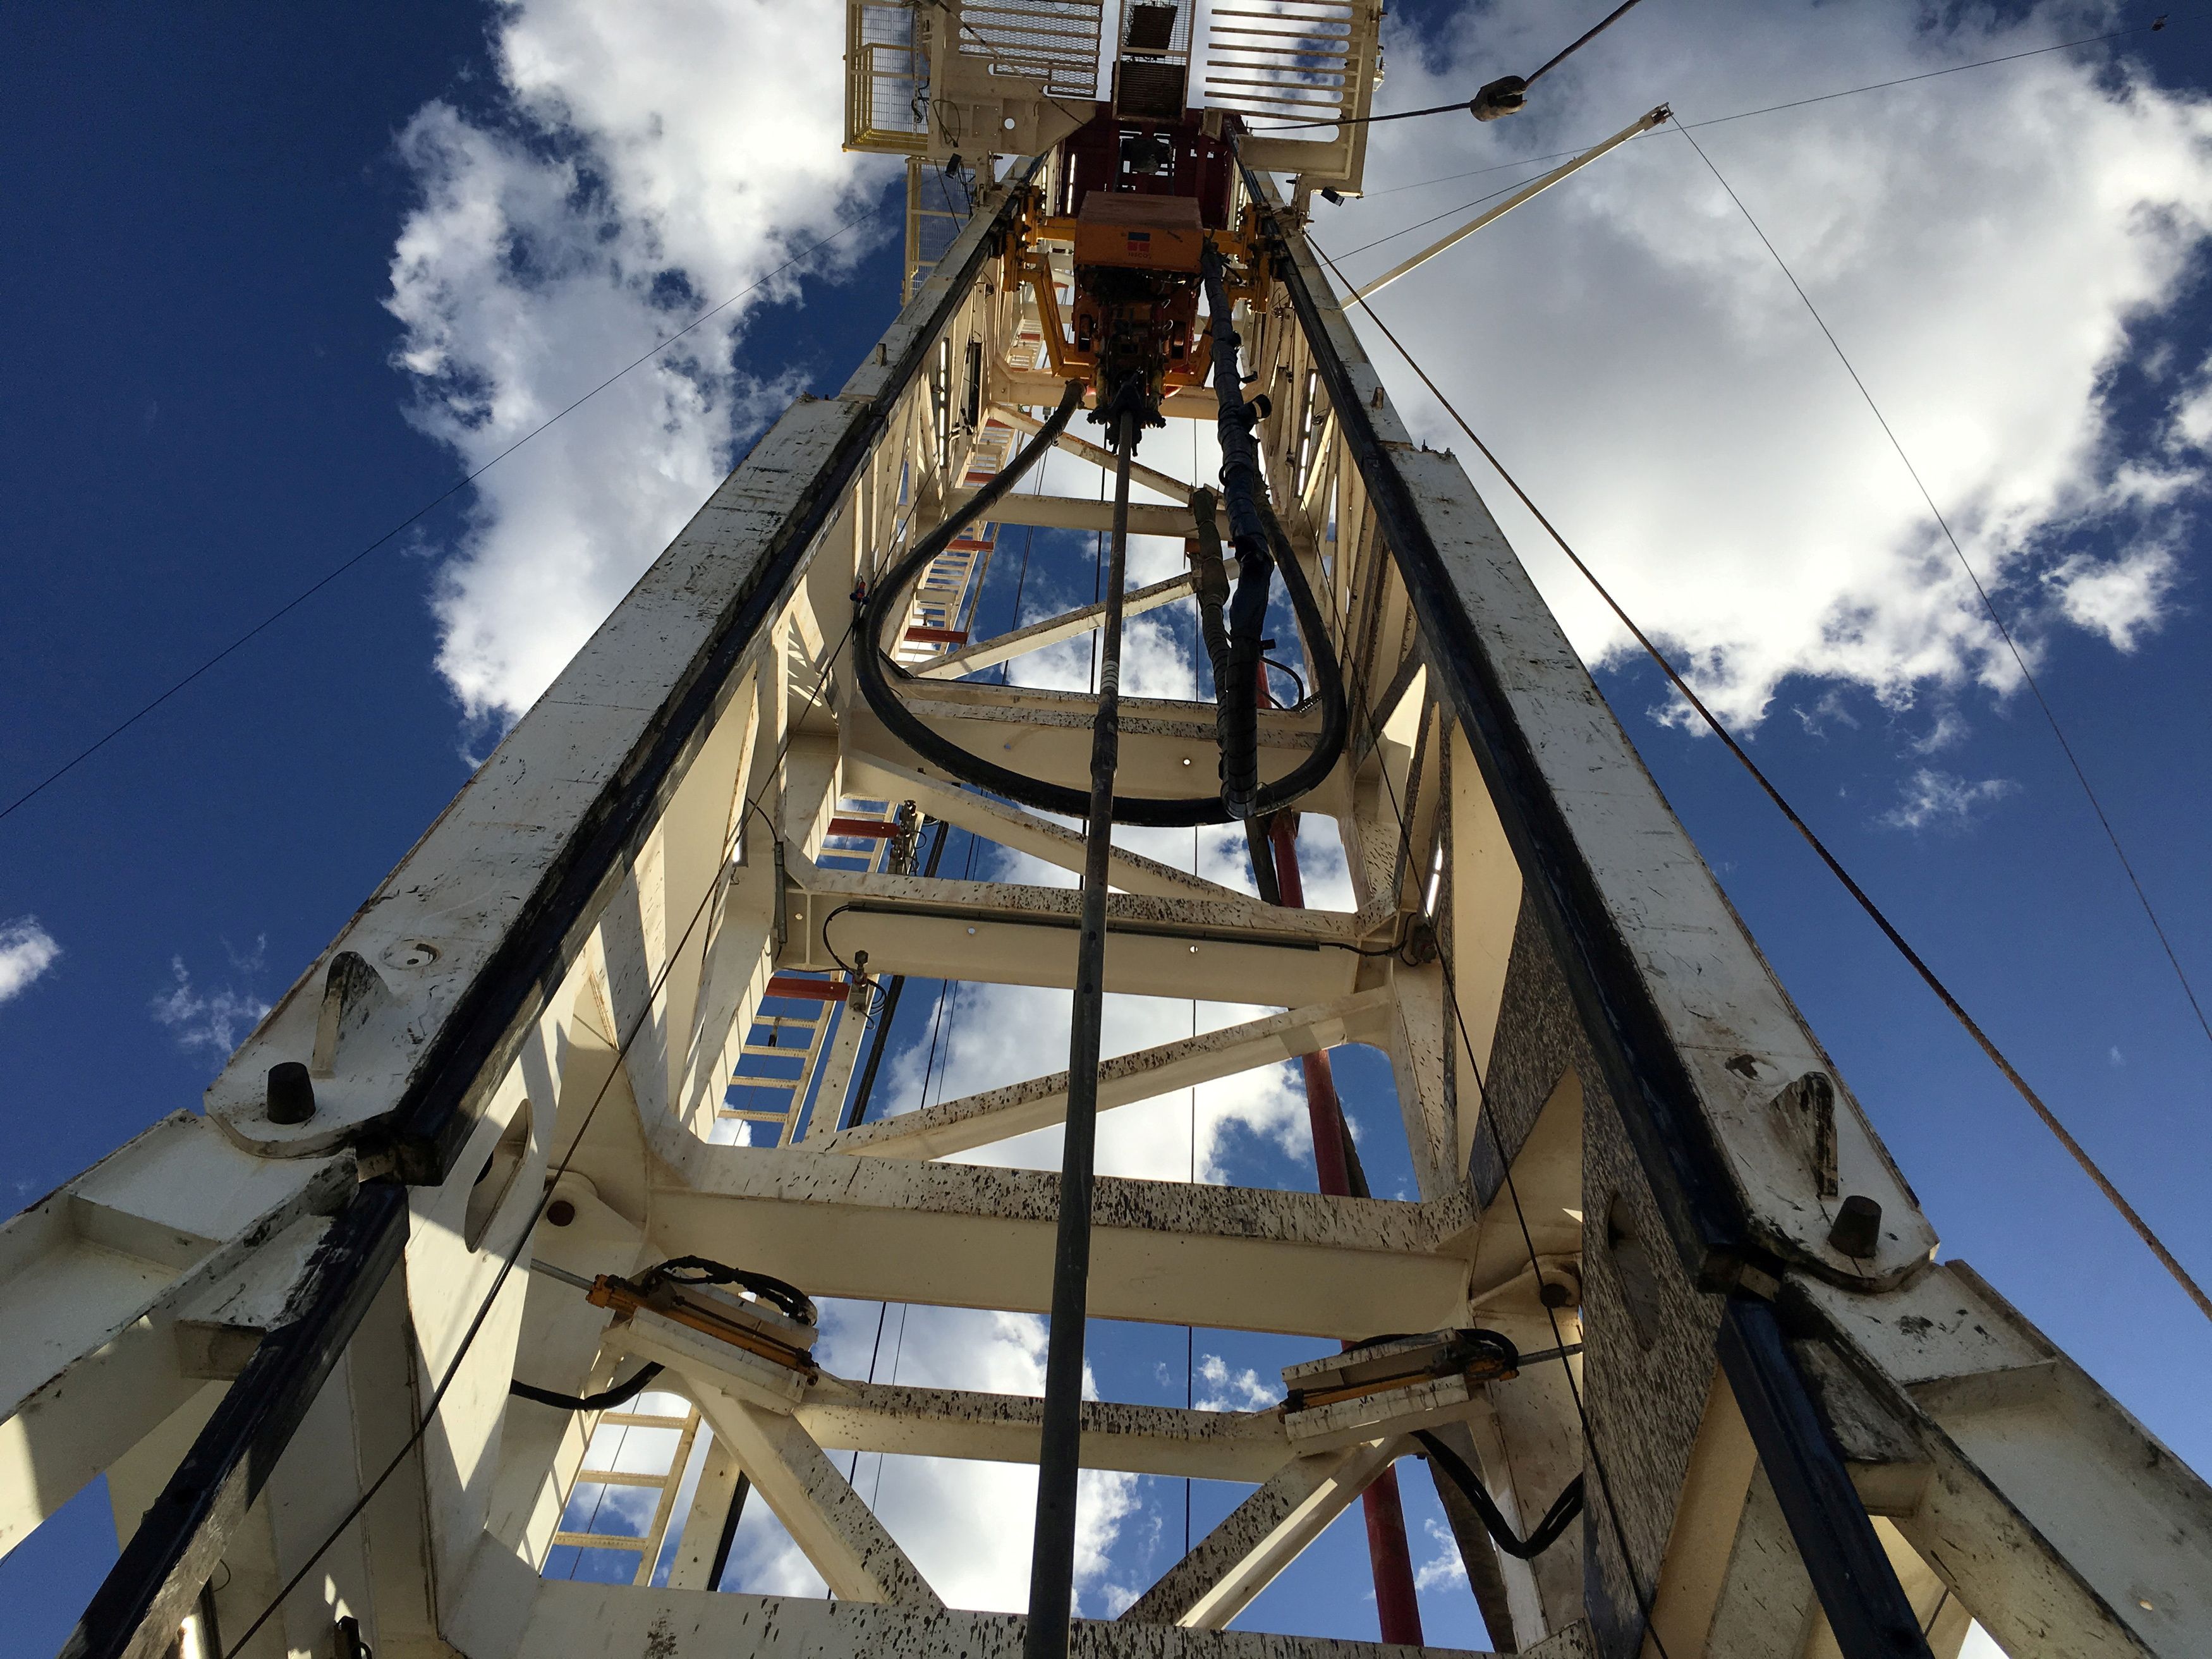 The Elevation Resources drilling rig is shown at the Permian Basin drilling site in Andrews County, Texas